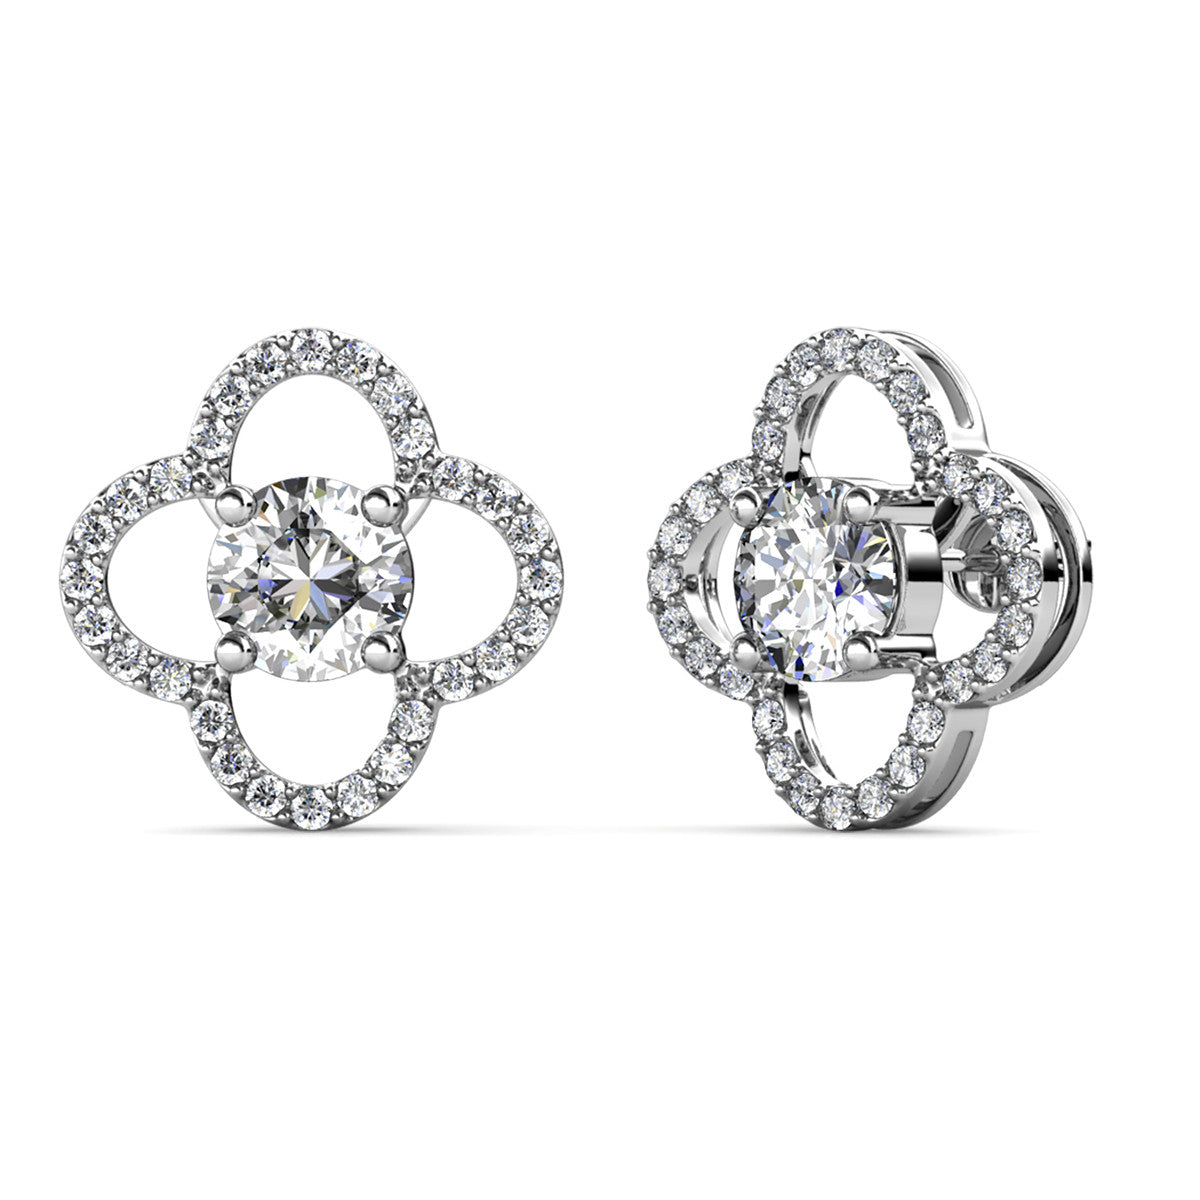 Moissanite by Cate & Chloe Charlotte Sterling Silver Stud Earrings with Moissanite and 5A Cubic Zirconia Crystals